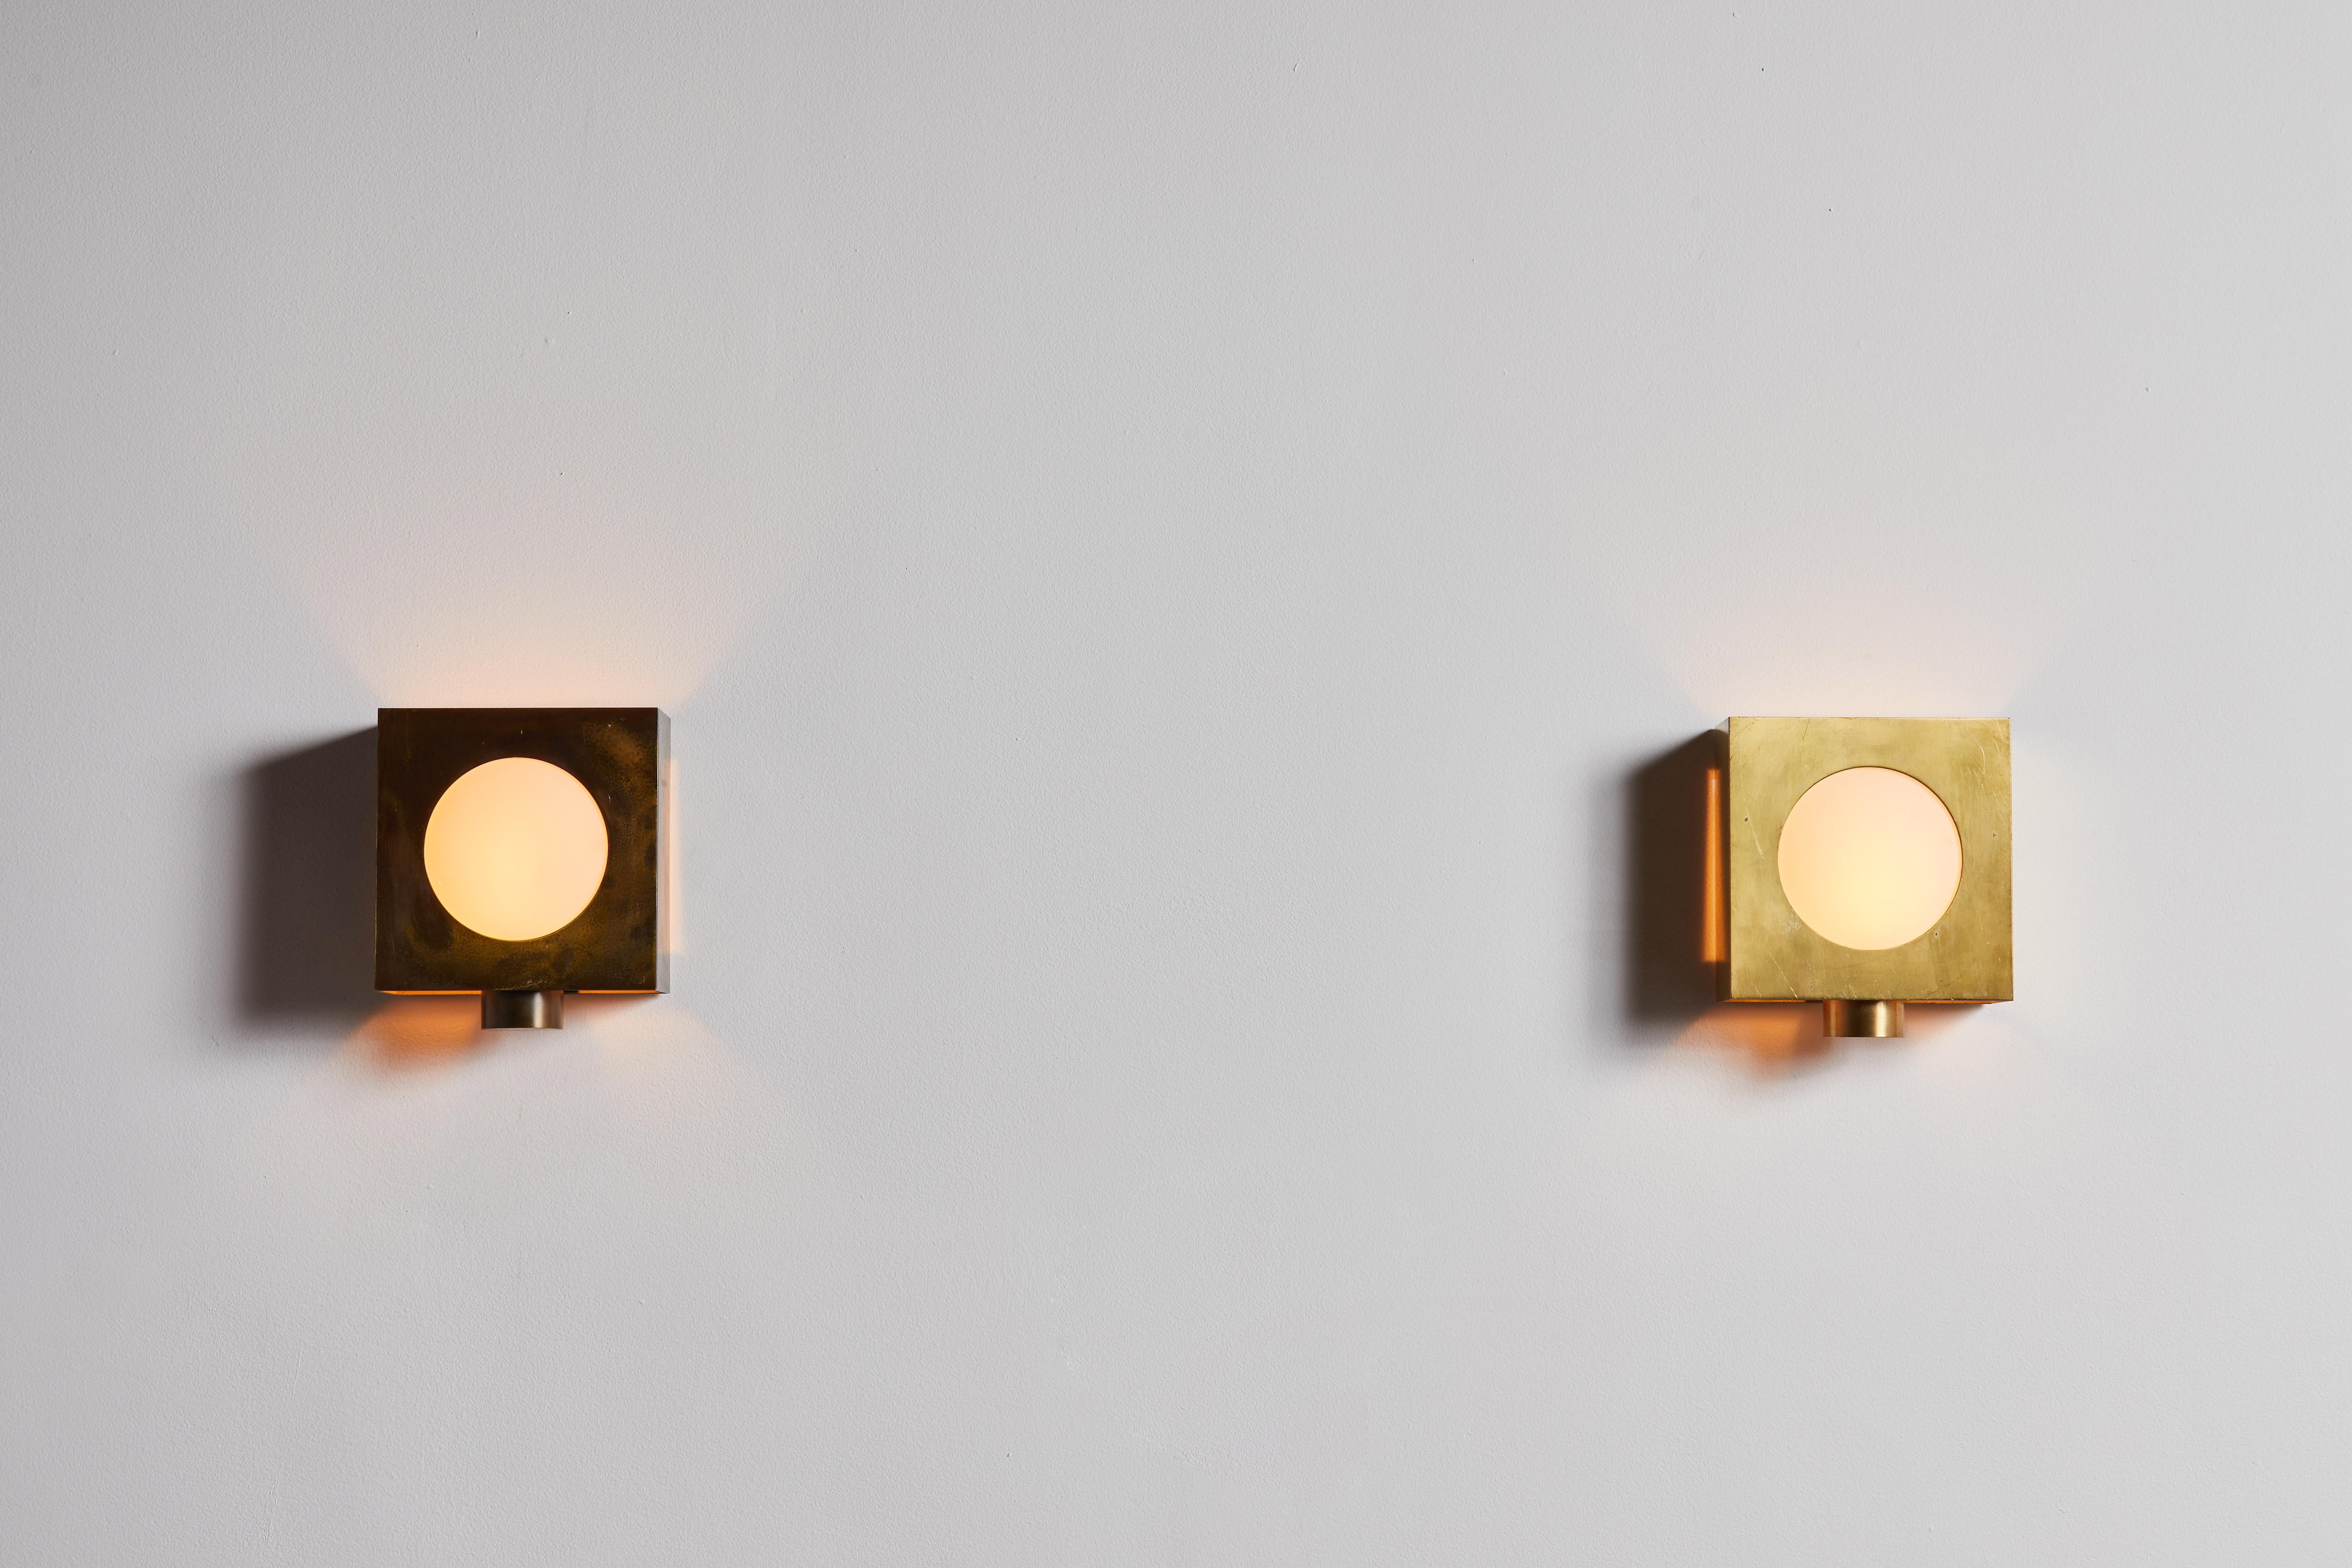 Pair of sconces by Arredoluce. Manufactured in Italy, circa 1950s. Brass, glass. Rewired for U.S. junction boxes. Retains original manufacturers label. Each sconces takes one E27 60w maximum bulb. Bulbs provided as a onetime courtesy.